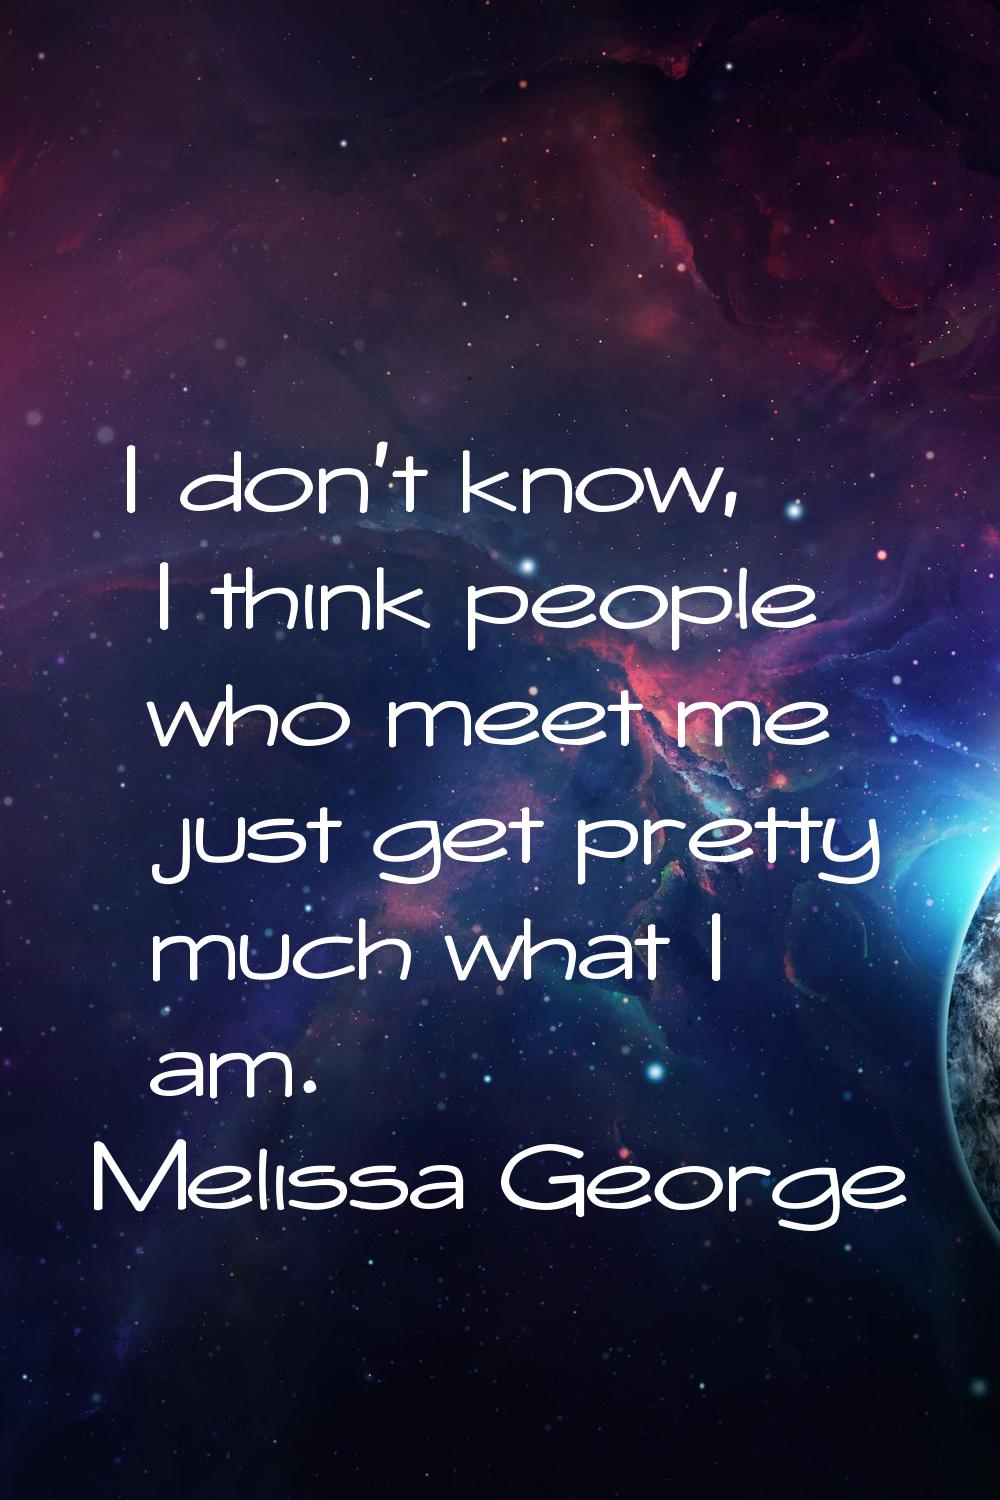 I don't know, I think people who meet me just get pretty much what I am.